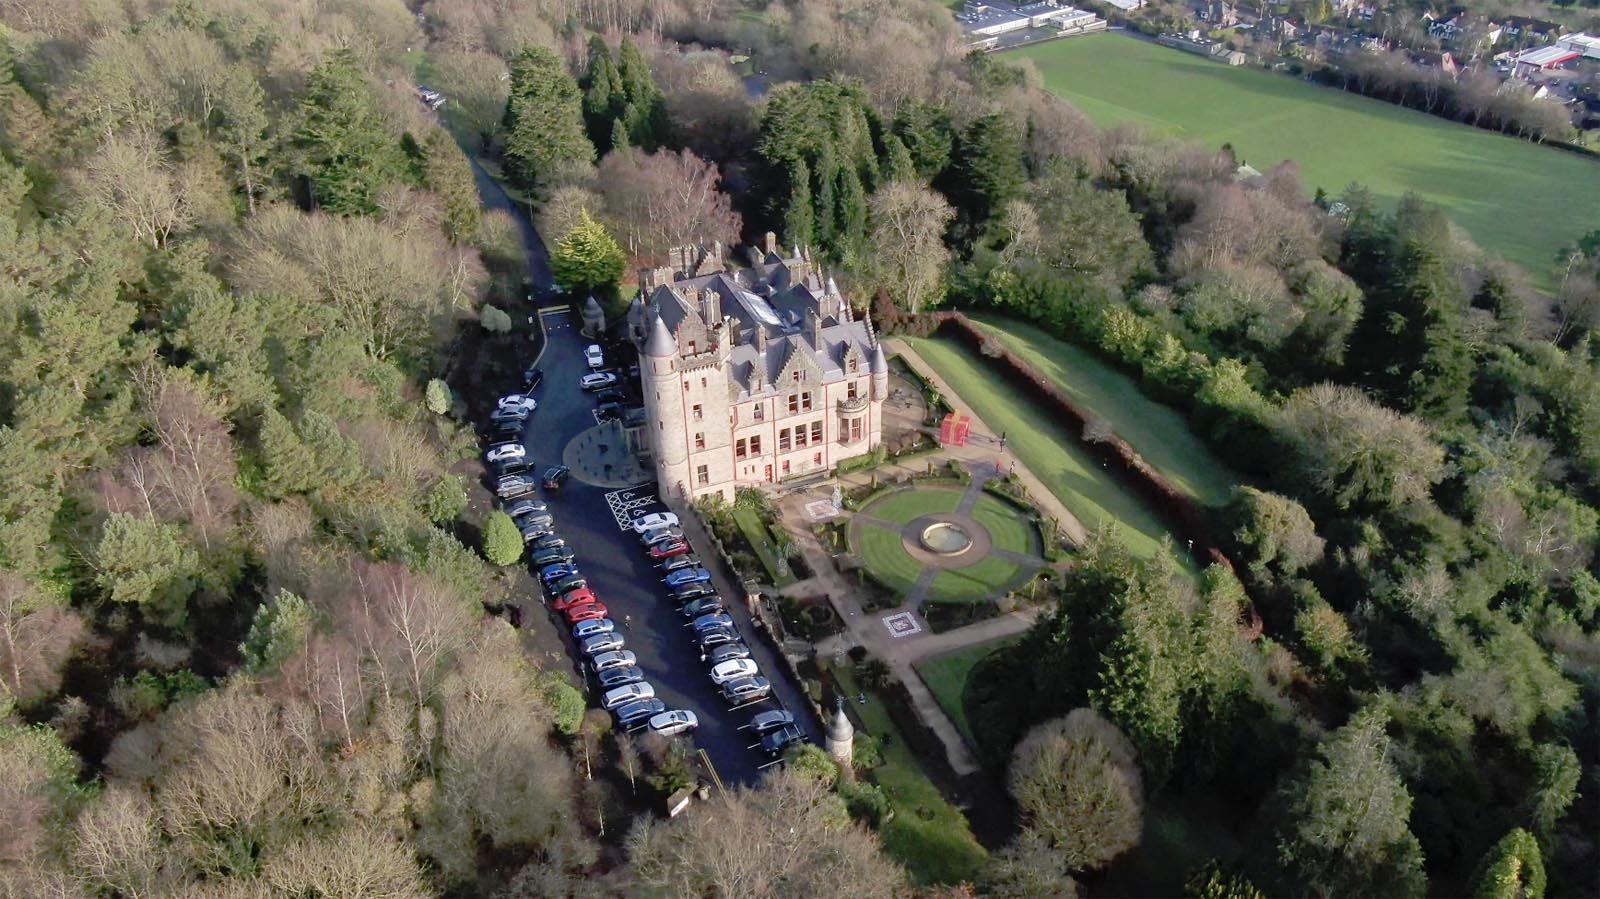 Aerial drone photography and video production services Dublin and Ireland portfolio - changing seasons in one video of Belfast Castle, Northern Ireland, video screenshot 2